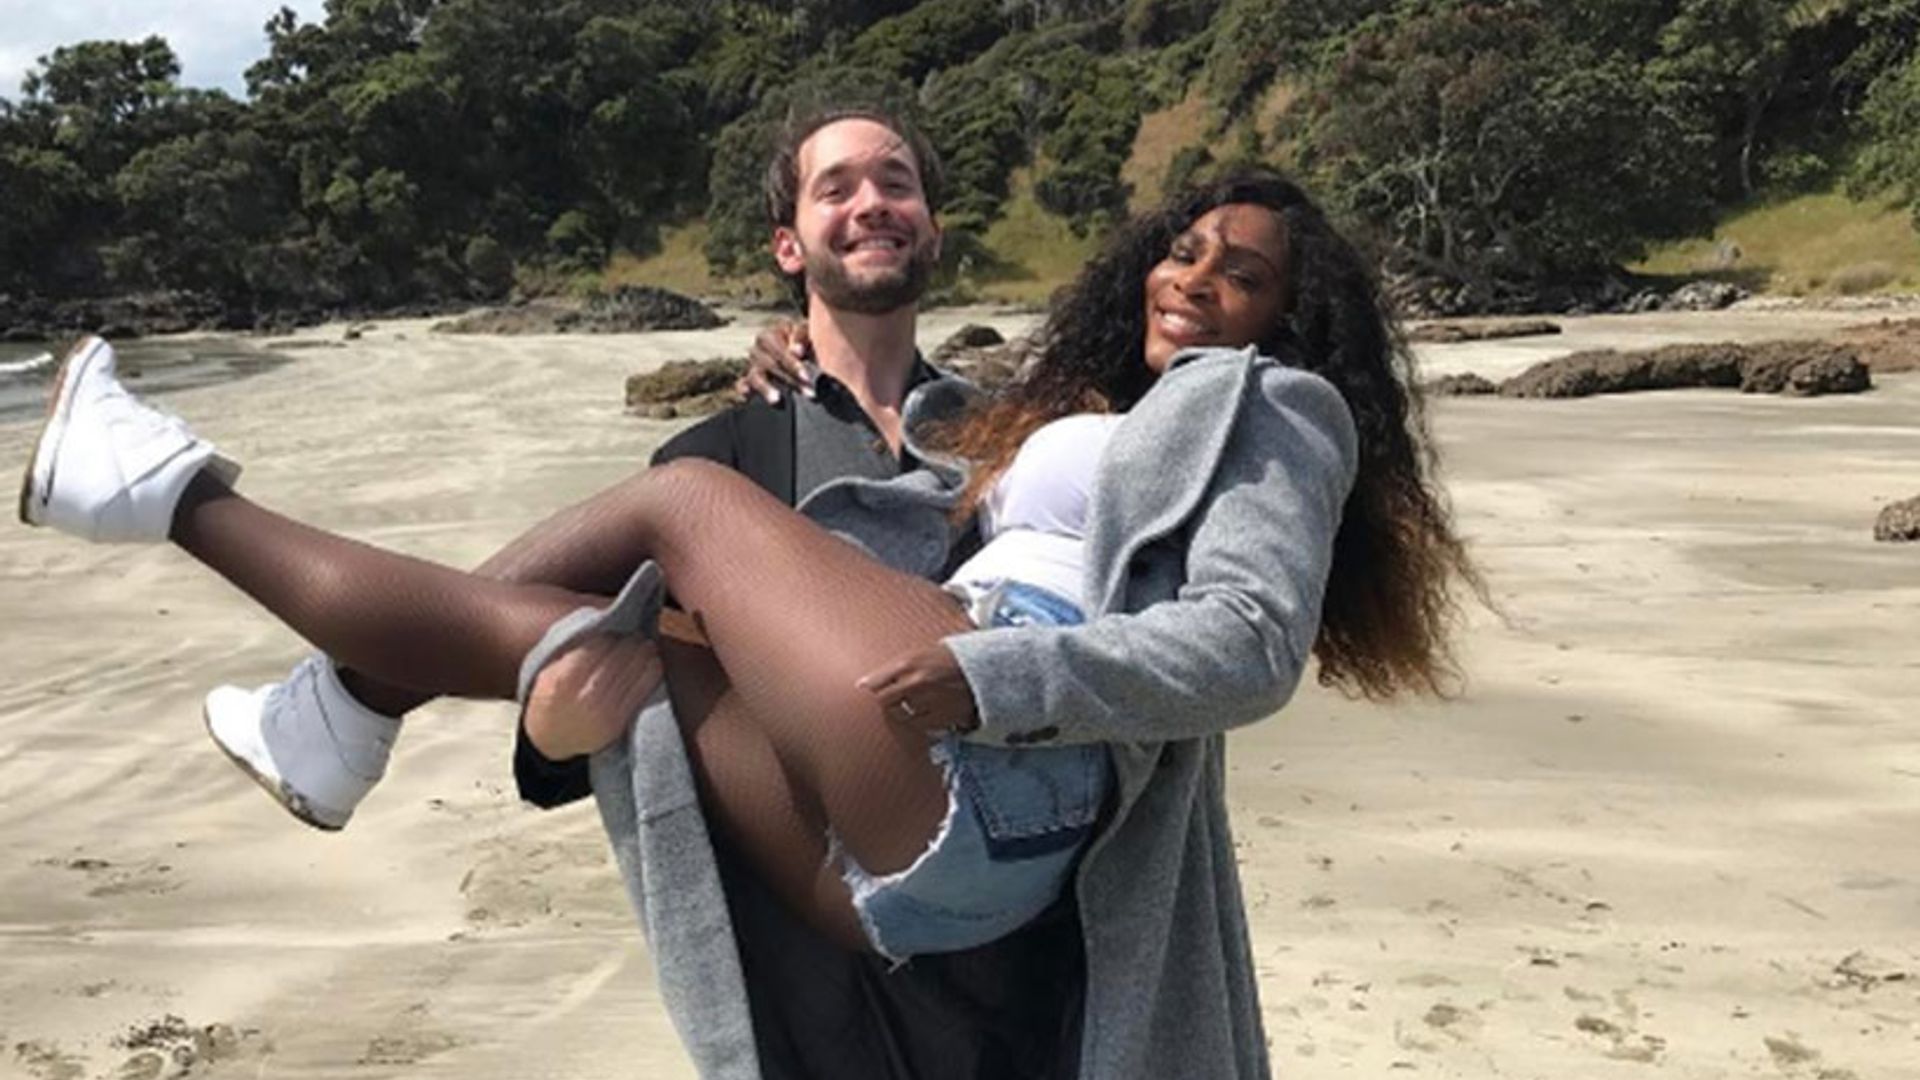 Serena Williams won the Australian Open while pregnant, it has been confirmed